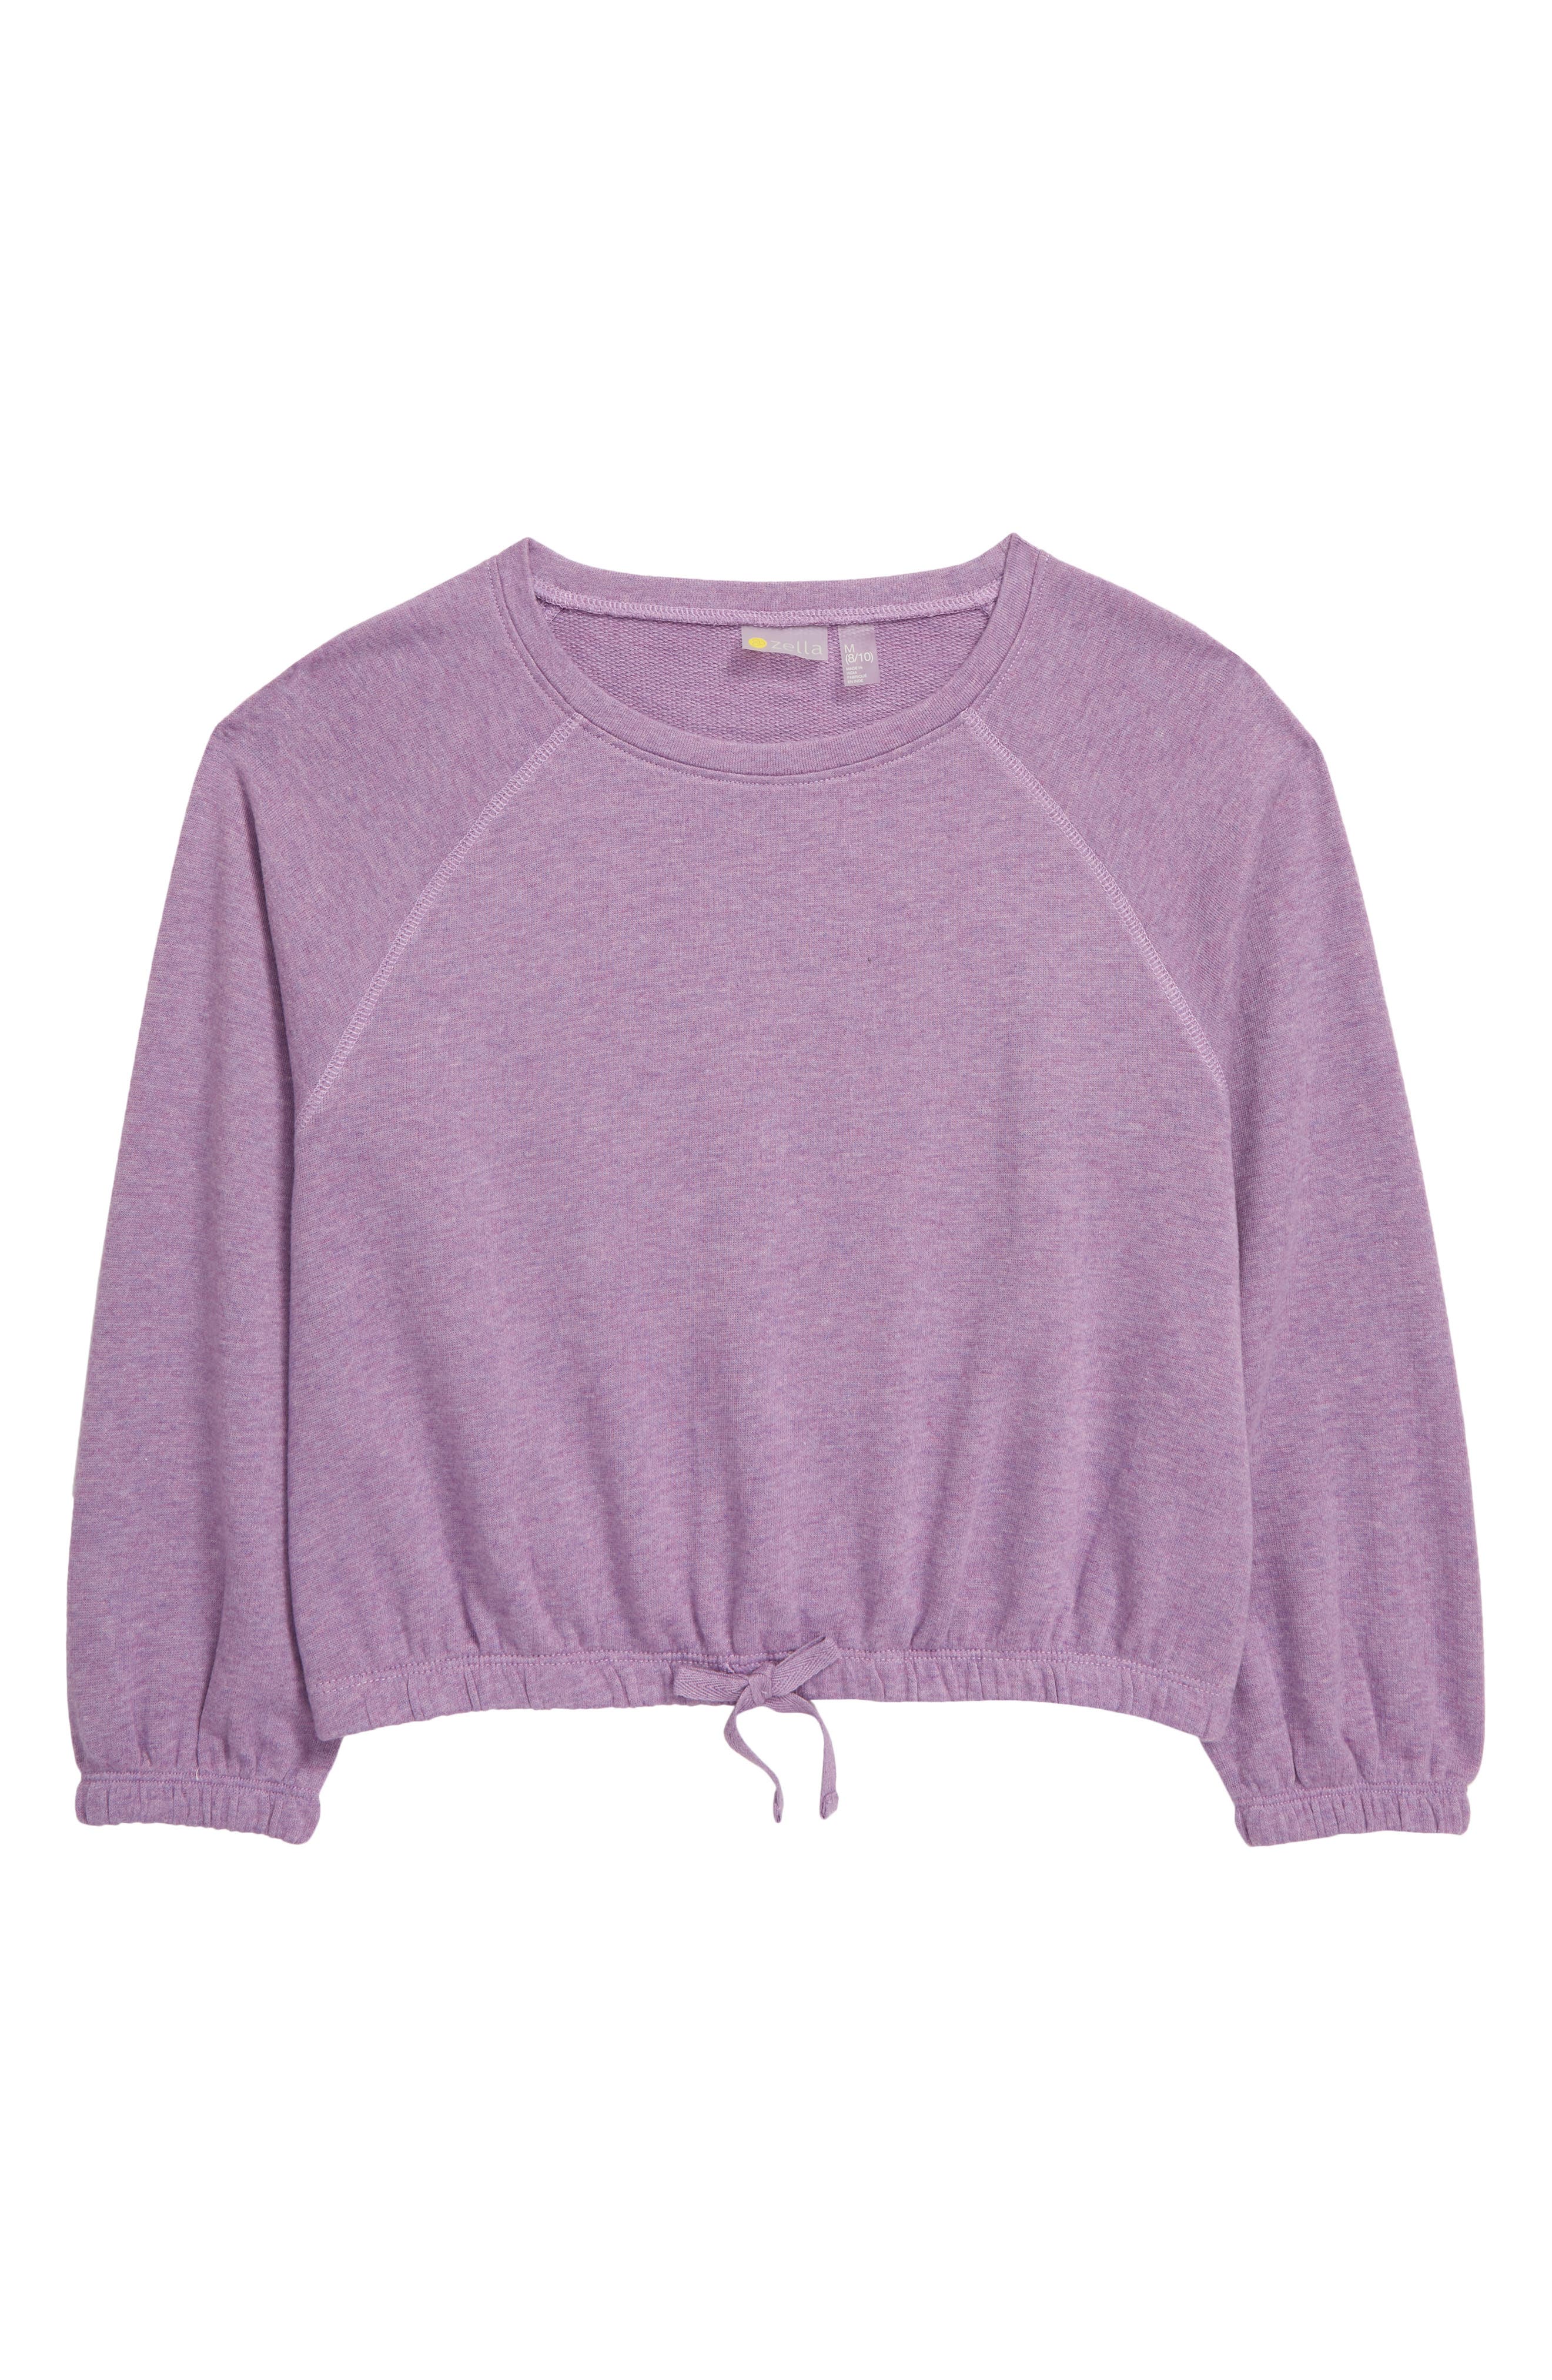 Long Sleeved Lavender Knit Top Shirt made for 18" American Girl Doll Clothes